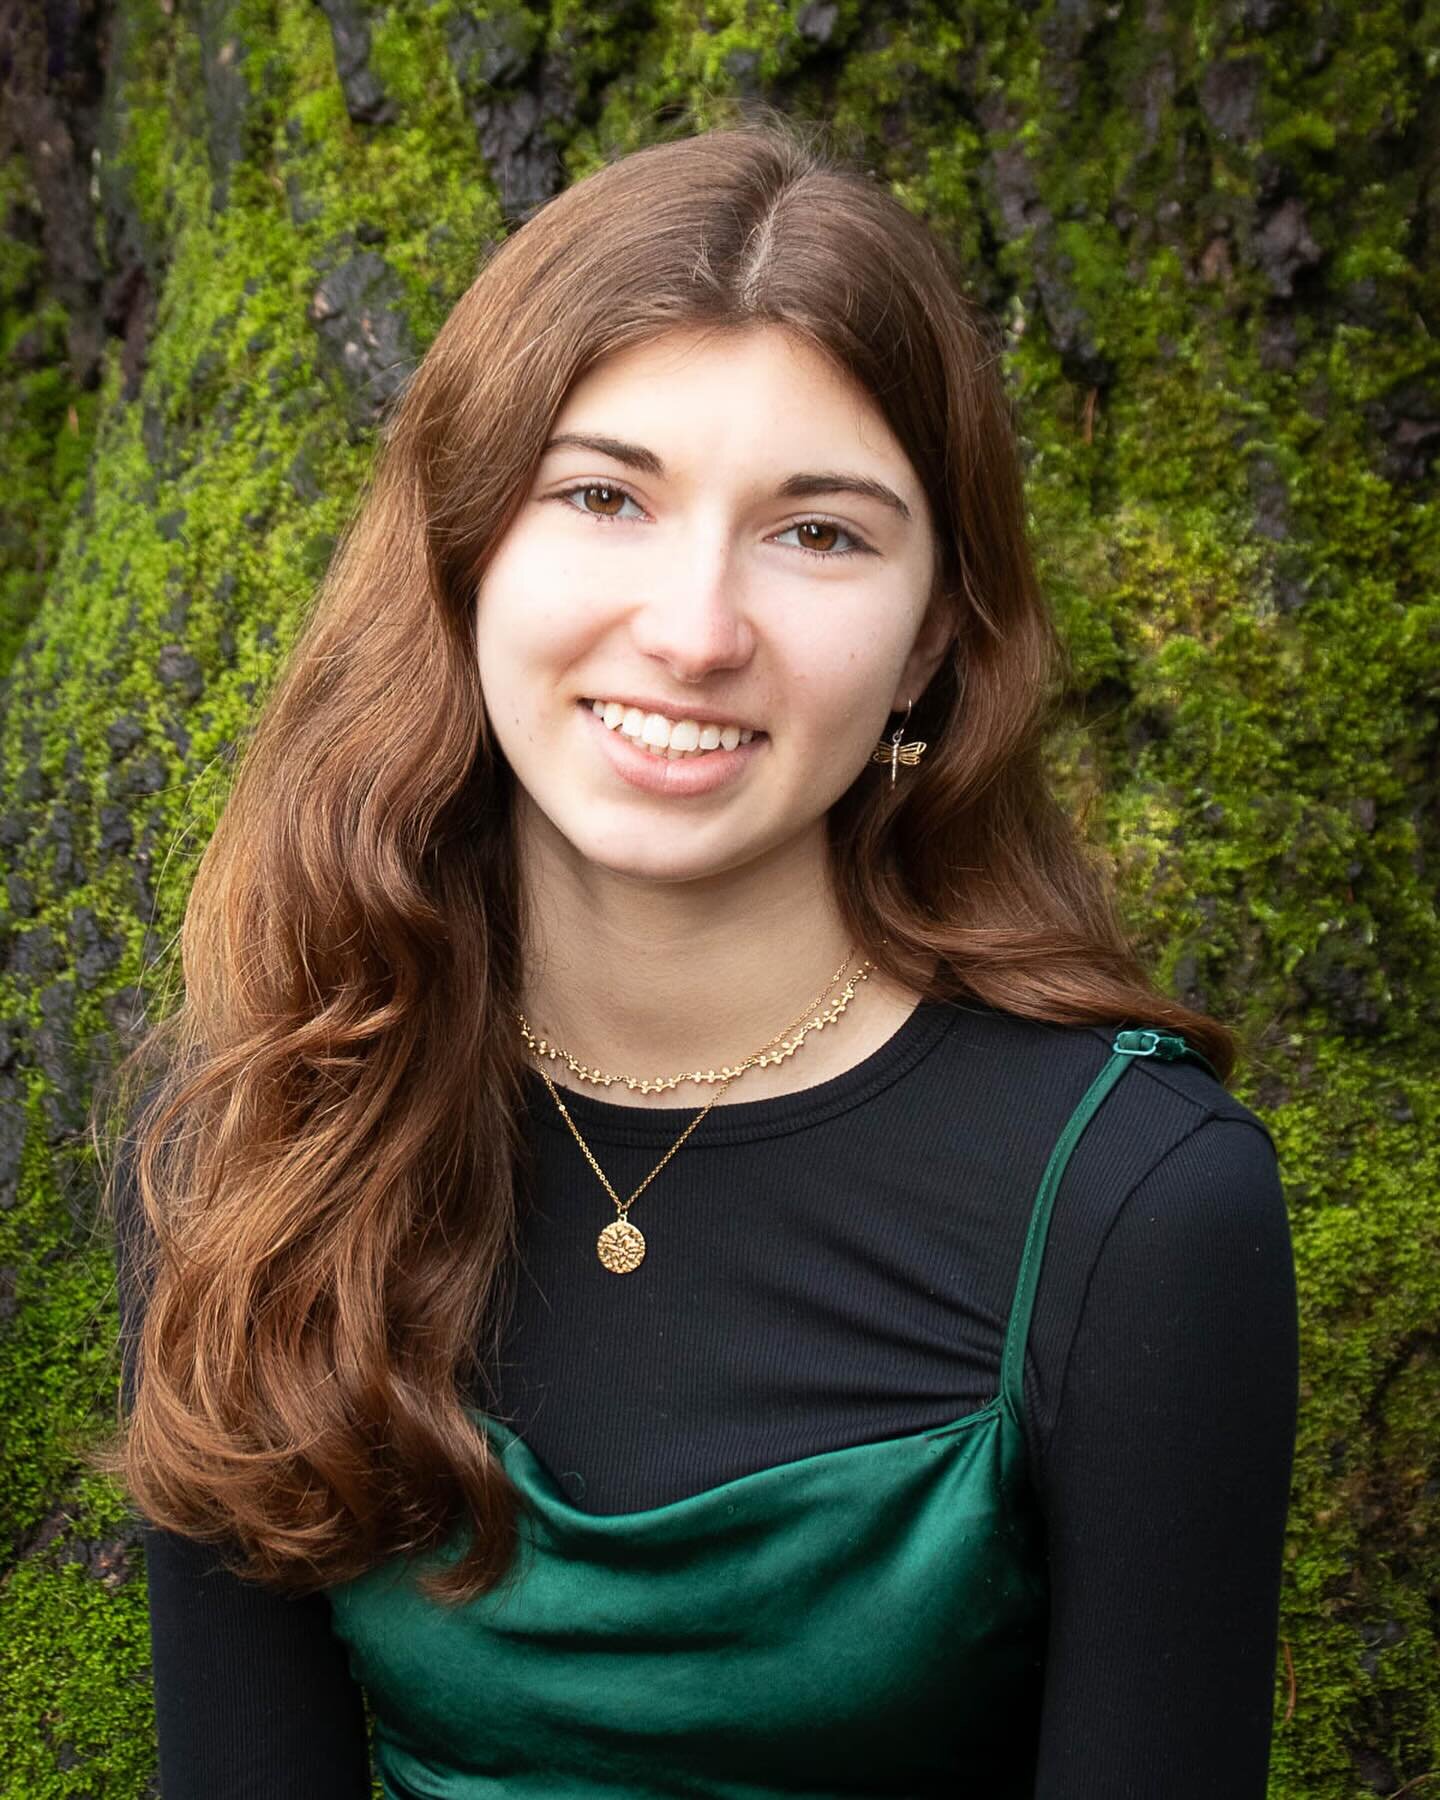 Mazel Tov to Leah from Seattle, Washington on her ED acceptance to Washington University in St. Louis where she will study biology and communication design. Gaining admission to &ldquo;hidden ivies&rdquo; or &ldquo;ivy comparable&rdquo; colleges is s